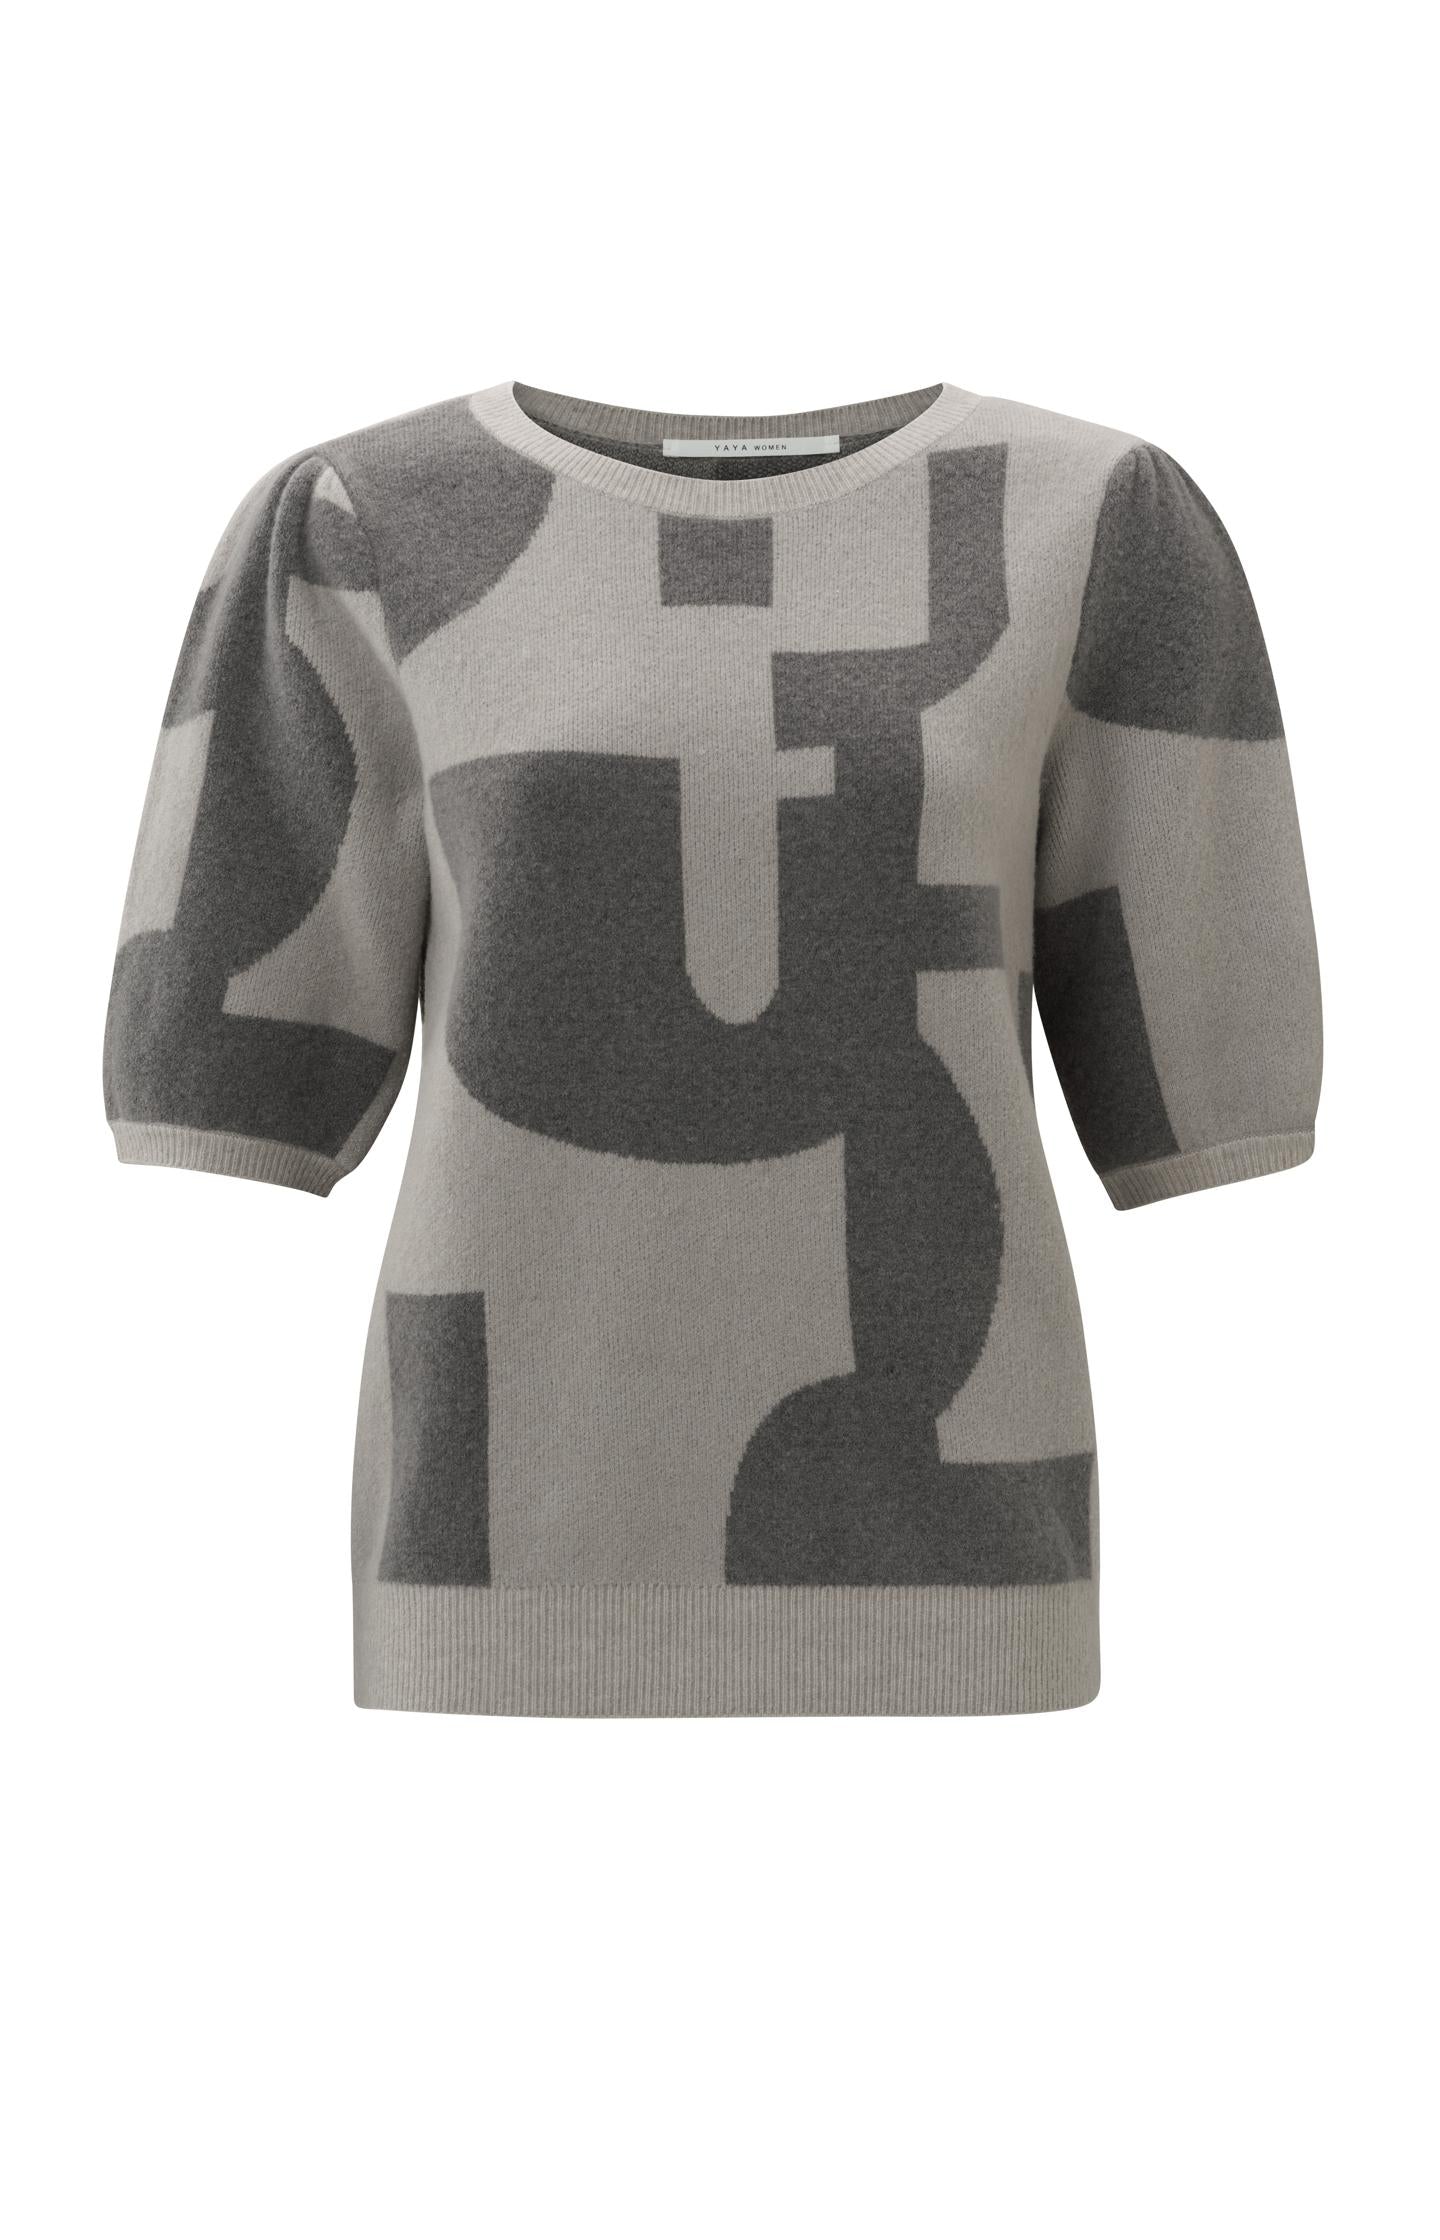 Crewneck sweater with half sleeves and jacquard print - Type: product